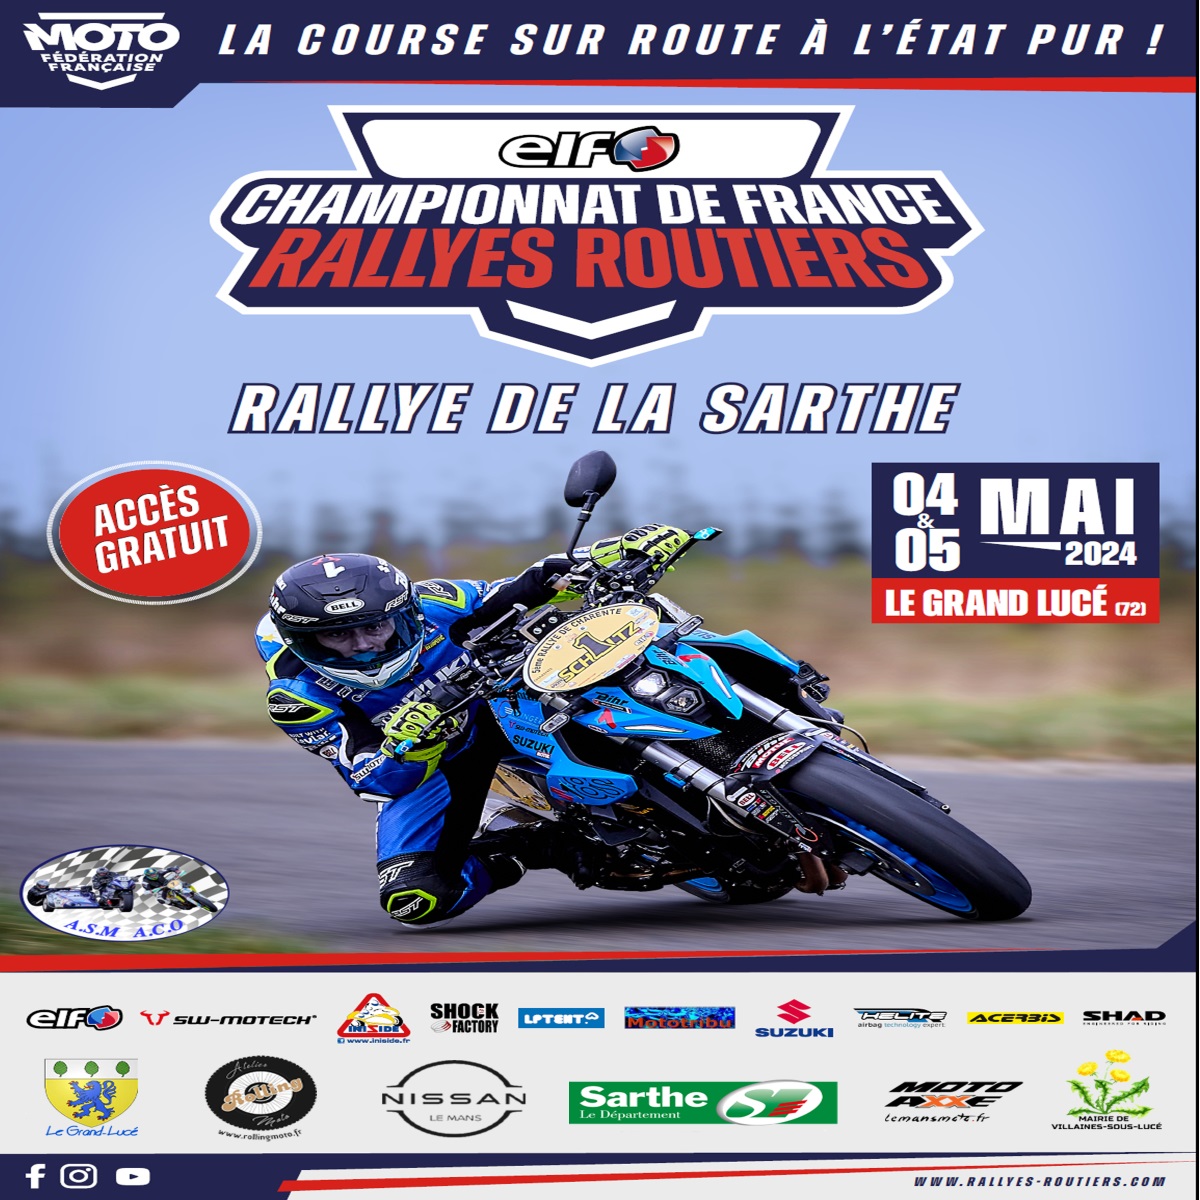 Info Rallyes Routiers - 4 et 5 mai